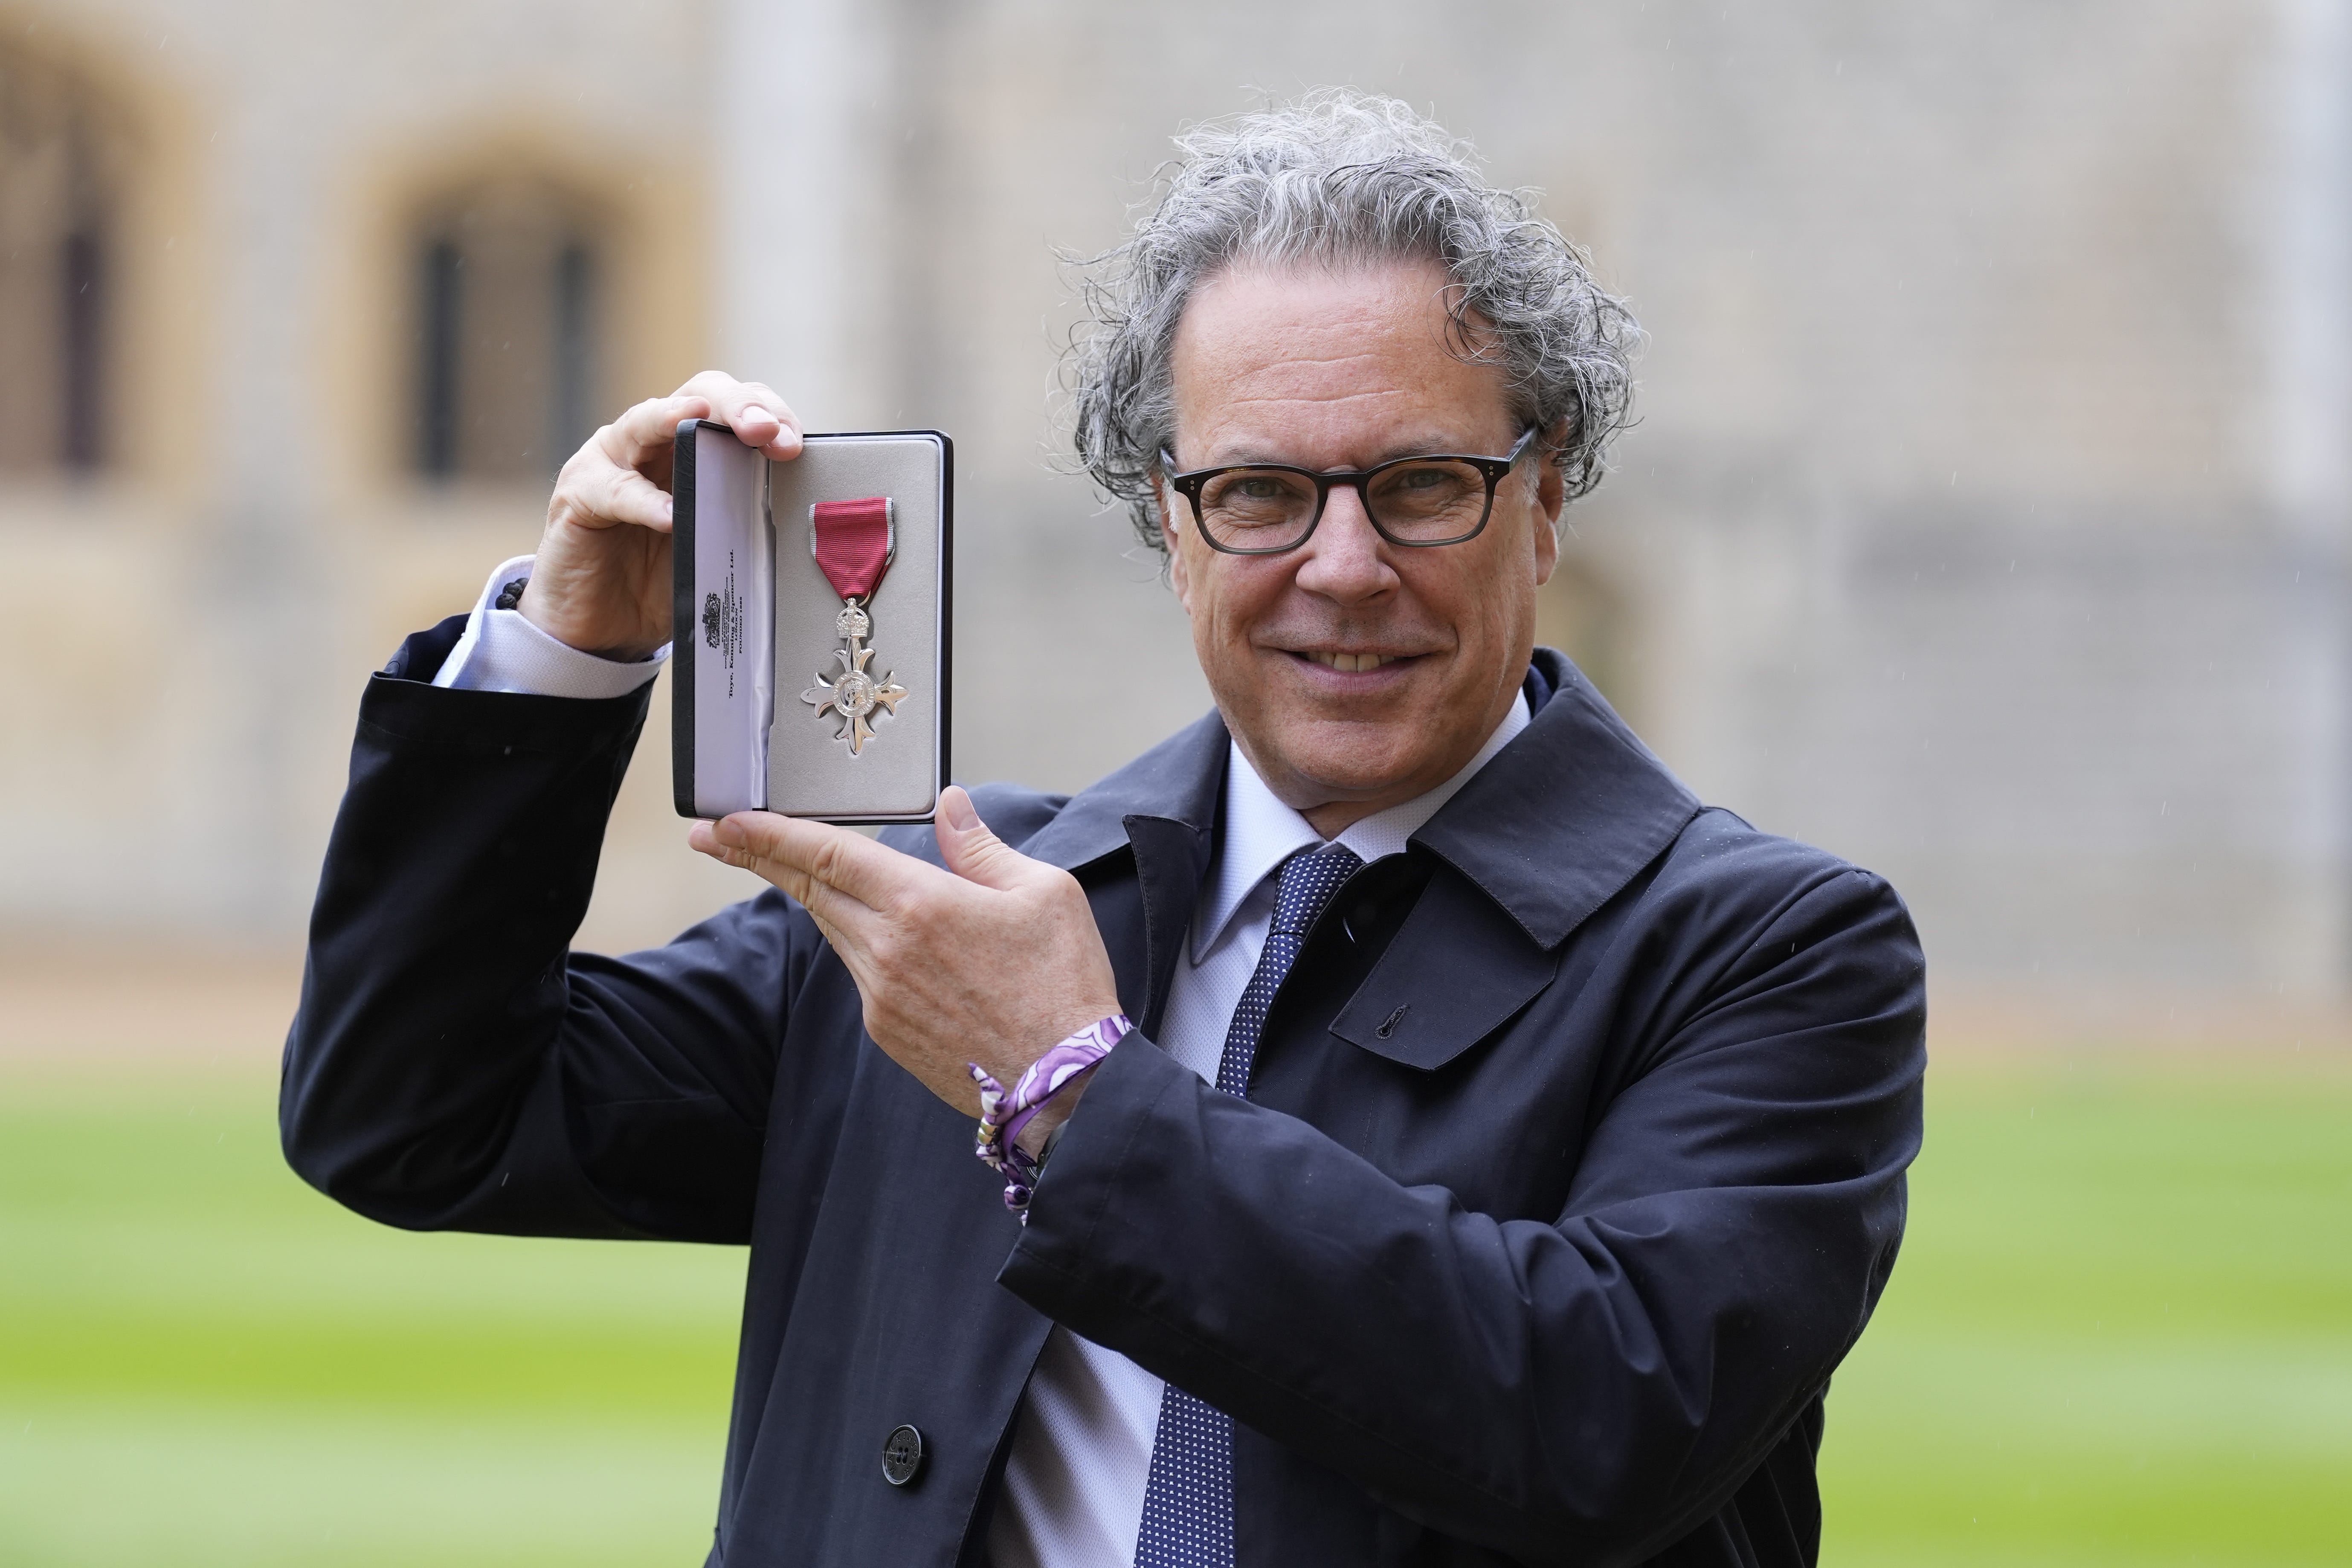 Ian Russell was made a Member of the Order of the British Empire by the Prince of Wales at Windsor Castle (Andrew Matthews/PA)